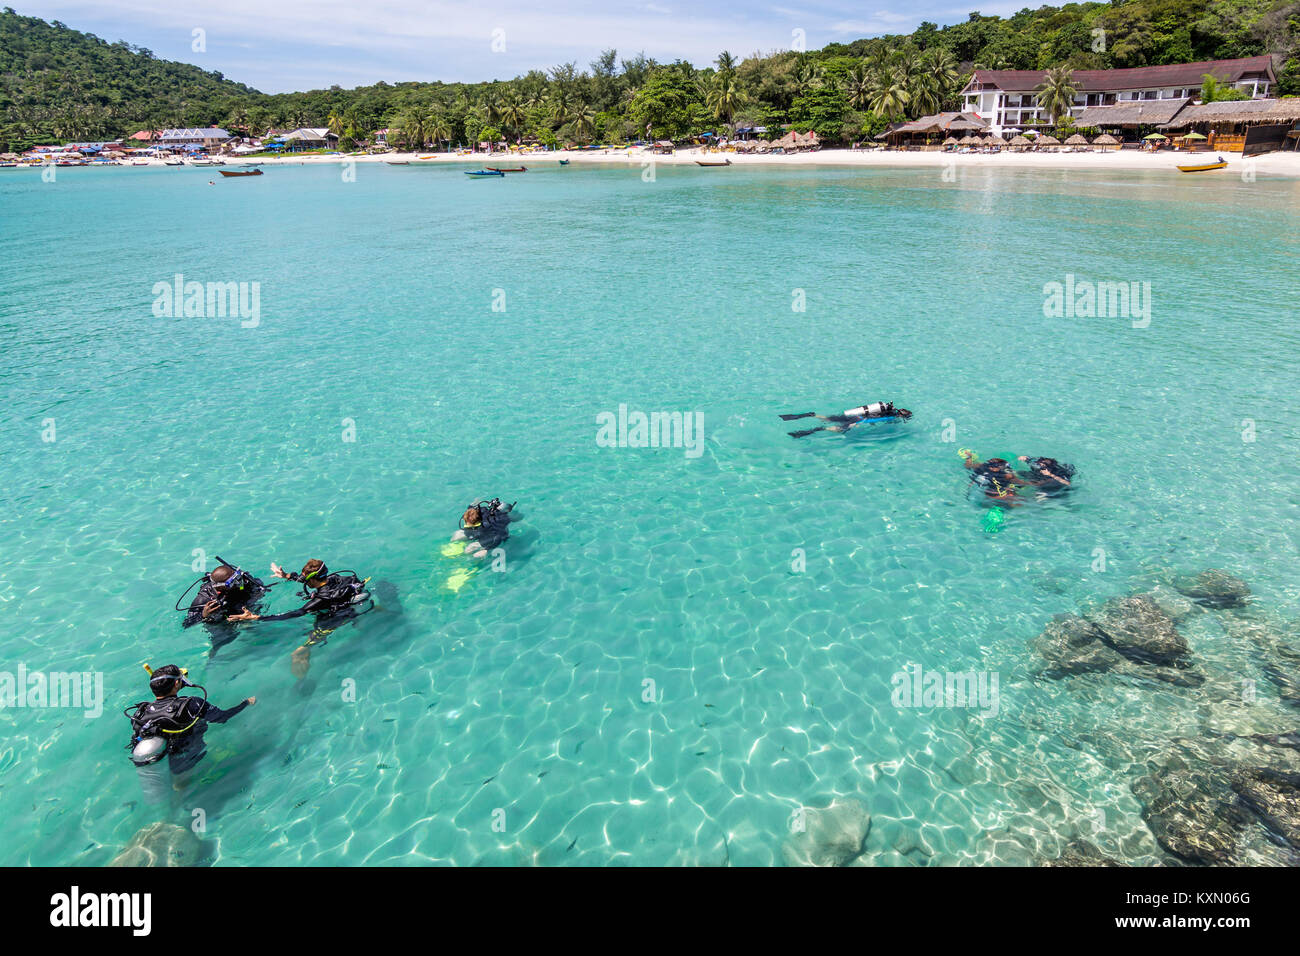 A group of Scuba Diving students have a lesson in the shallow crystal clear water of a Tropical Island. Stock Photo